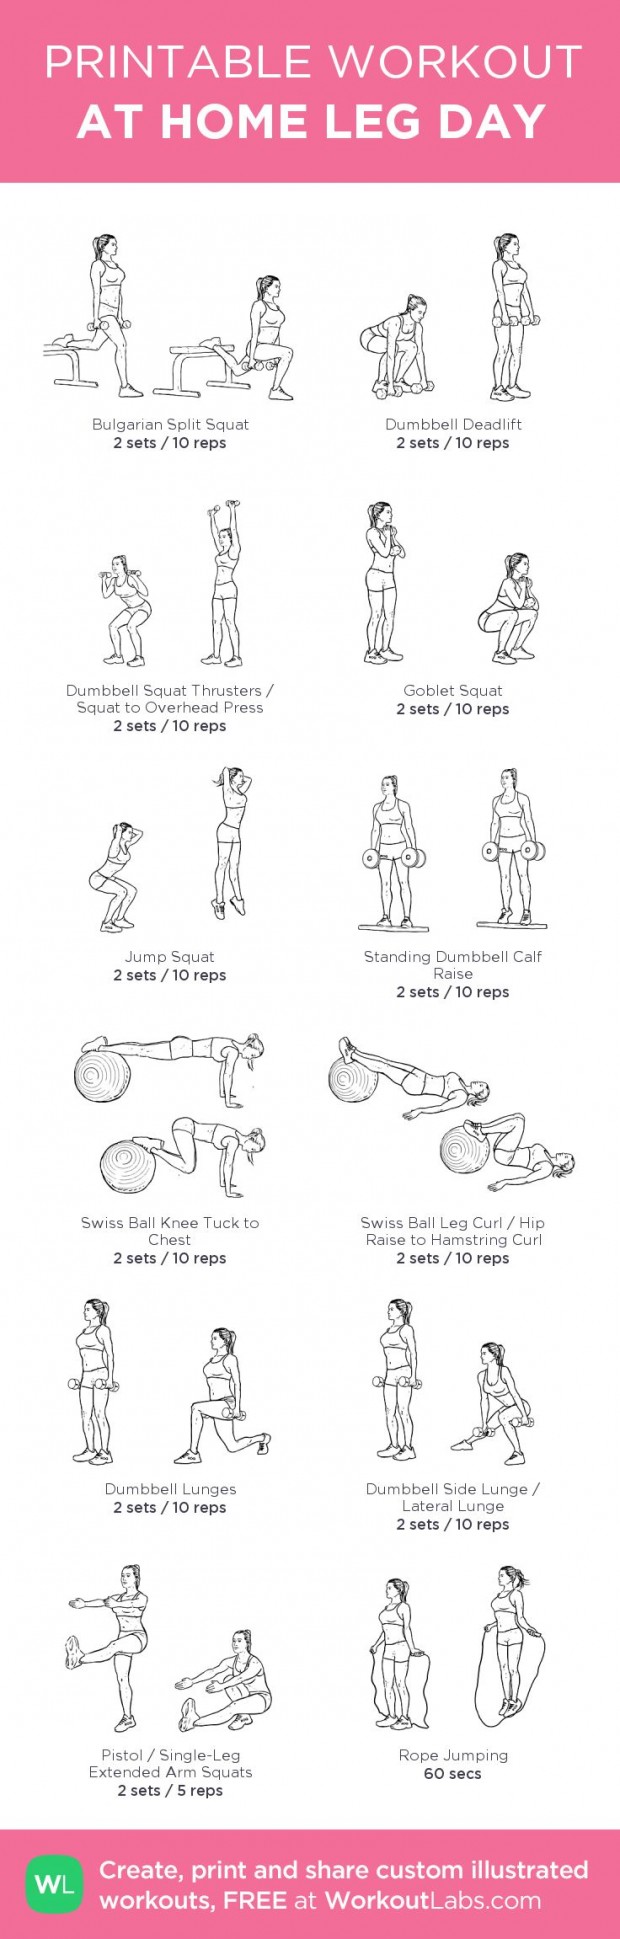 12 At Home Leg Day Workout for Women